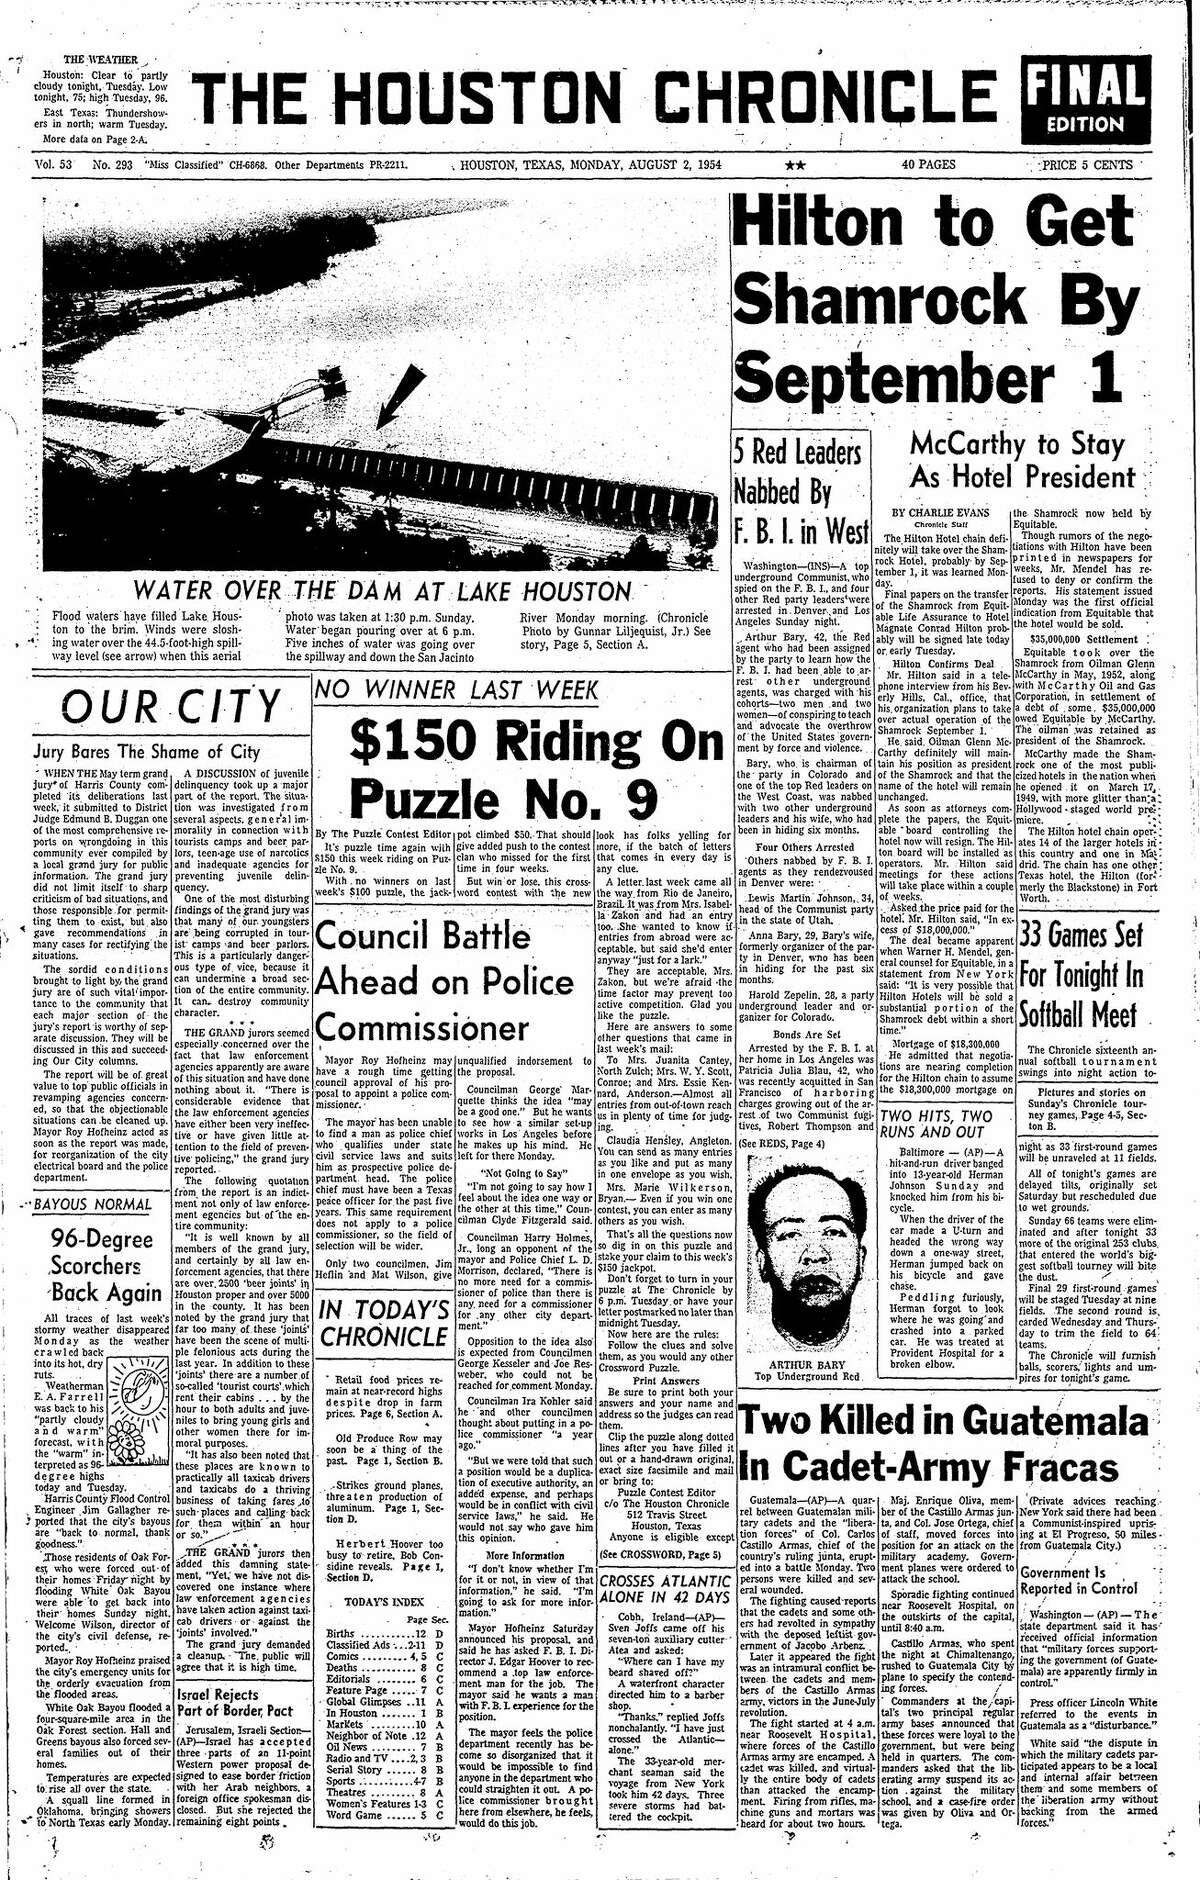 Houston Chronicle front page for Aug. 2, 1954.